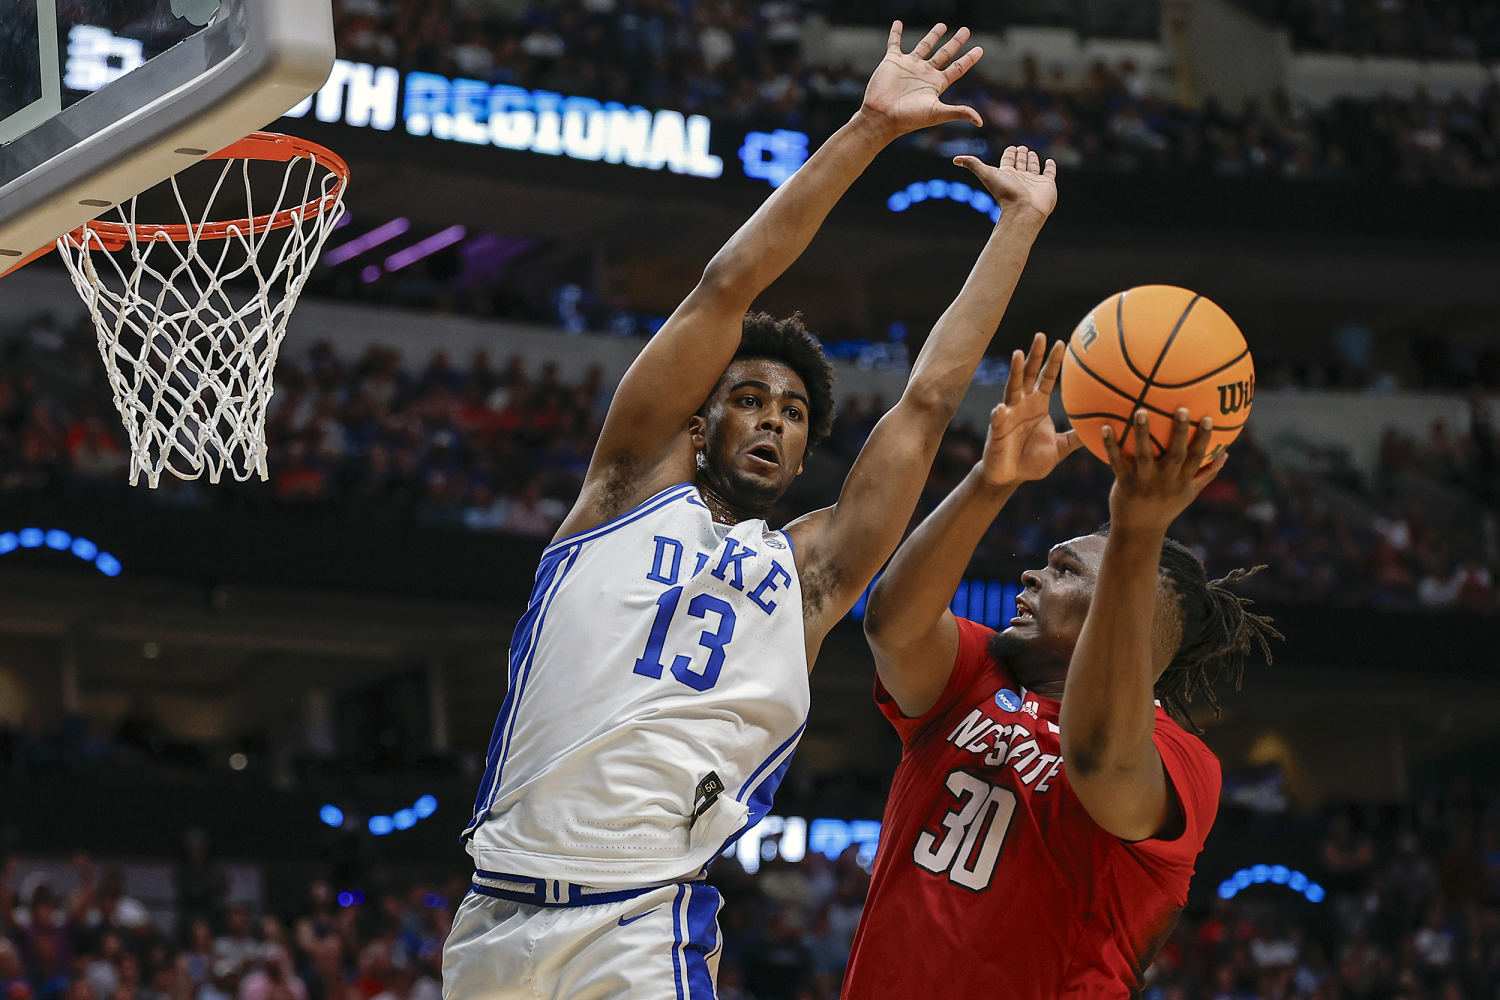 Men's NCAA Final Four is set with 11th seed N.C. State's shocking upset of Duke